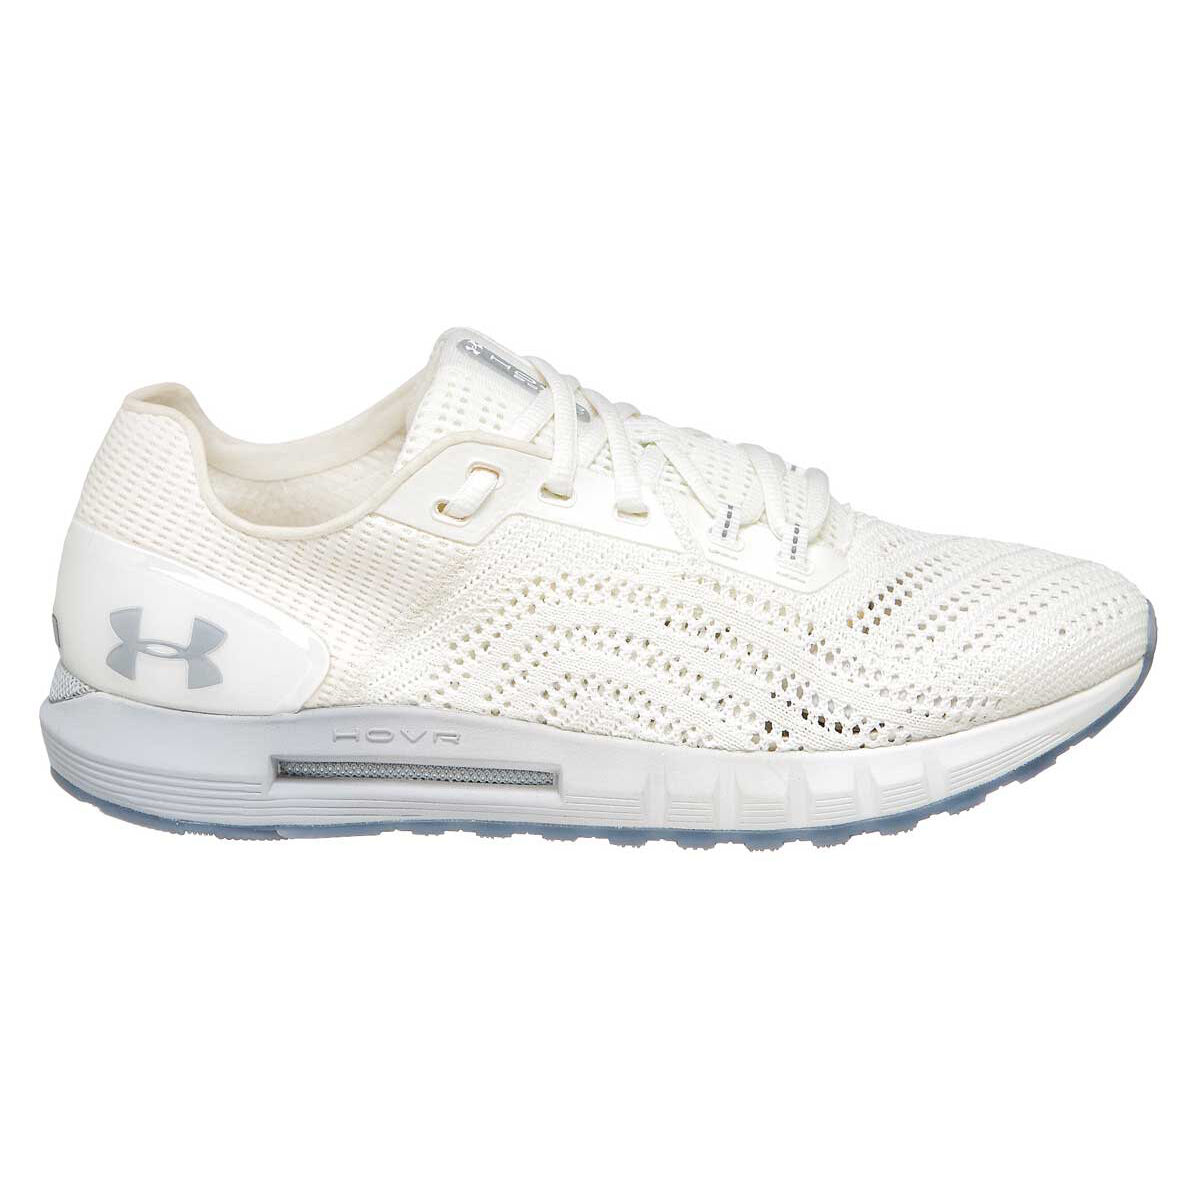 hovr sonic 2 mens running shoes